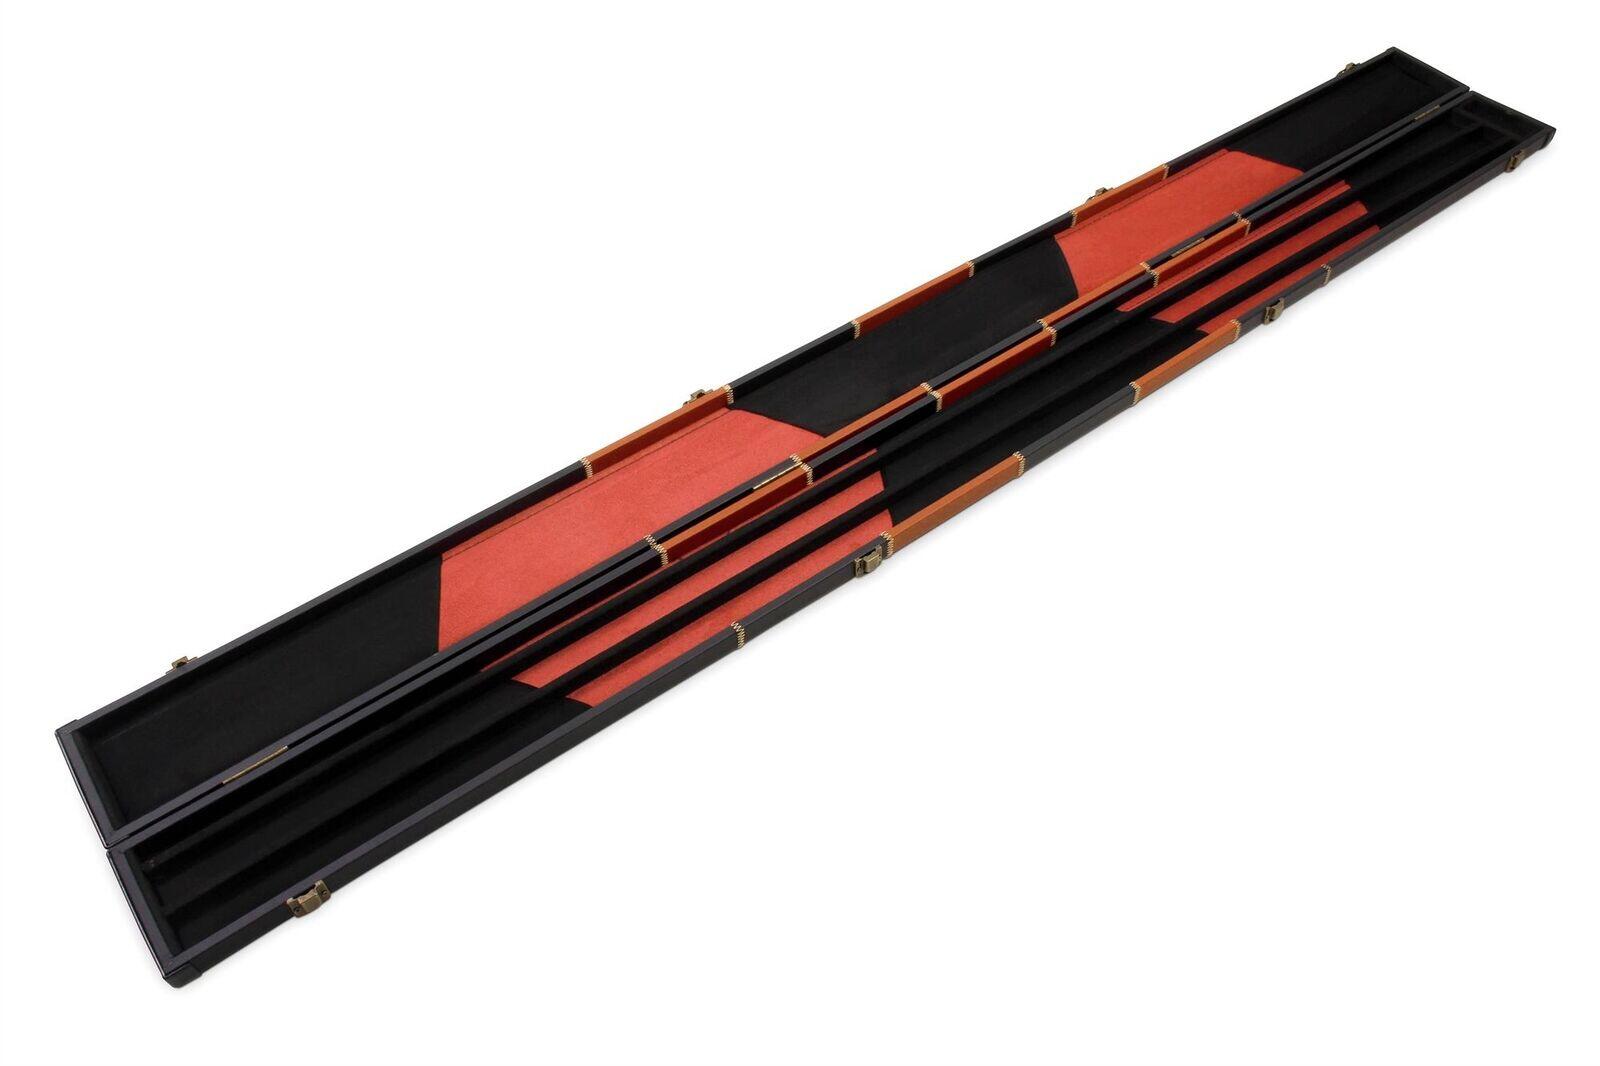 Deluxe 1 Piece WIDE ORANGE CHEQUERED Snooker Pool Cue Case - Holds 3 Cues 7/7